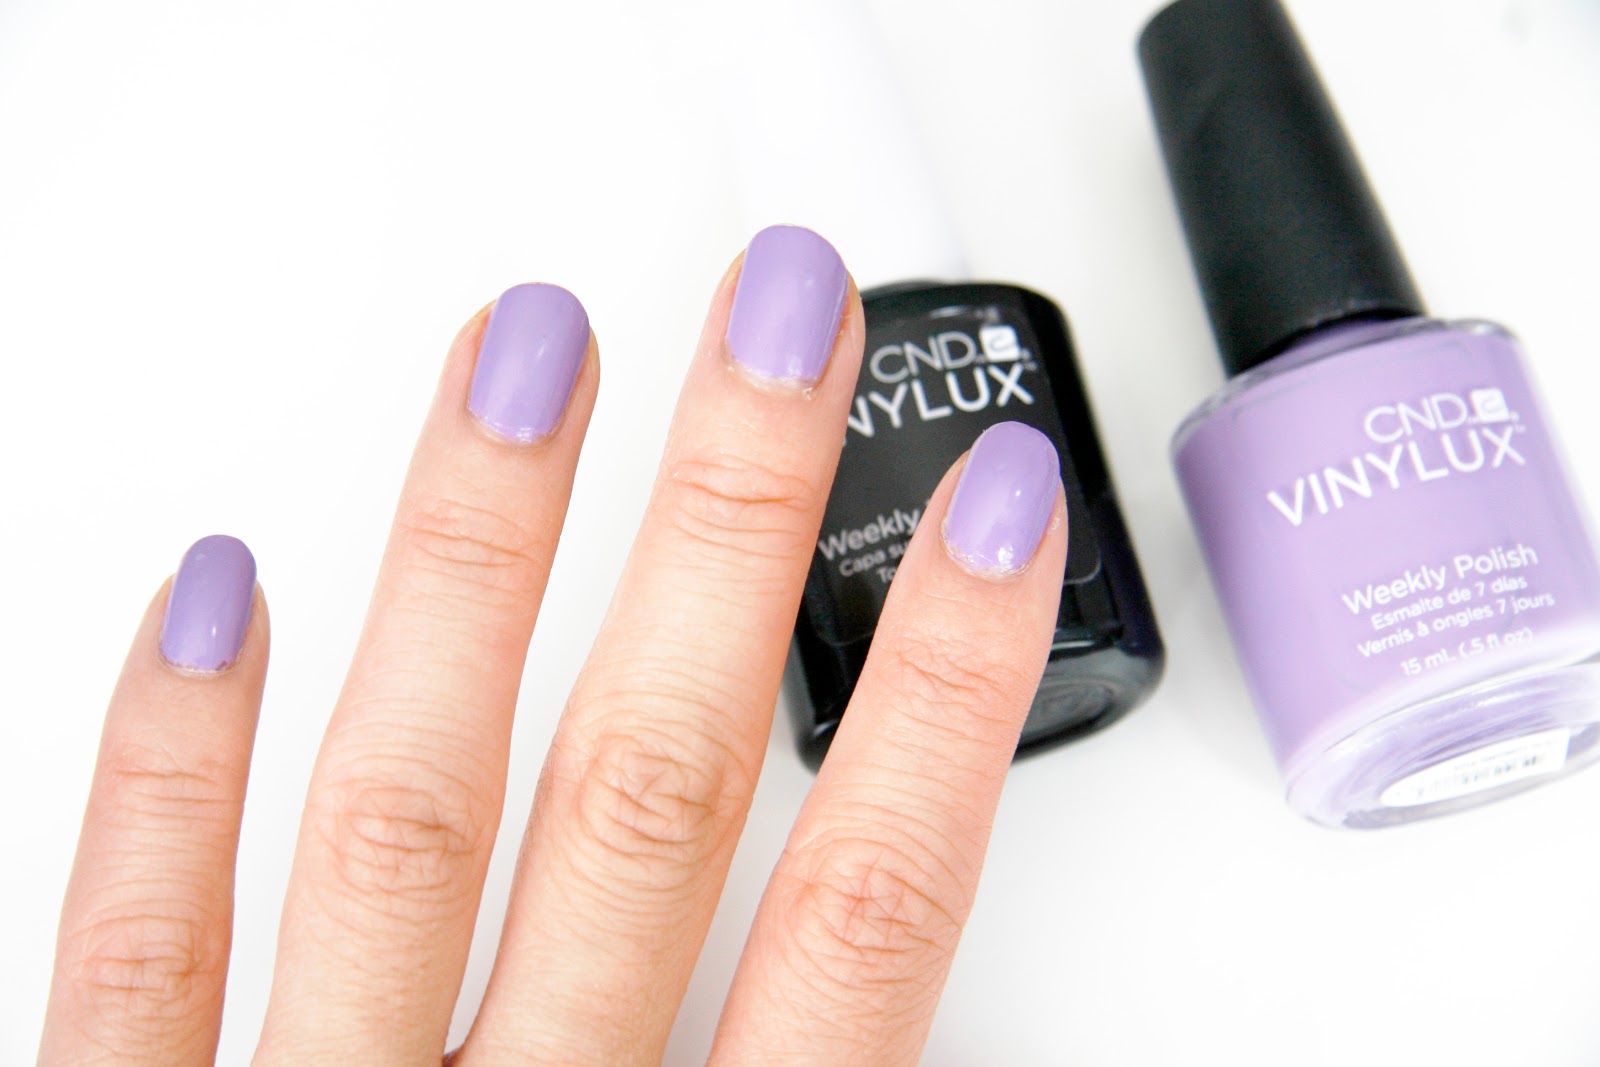 CND Vinylux Weekly Polish in "Palm Springs Escape" - wide 9